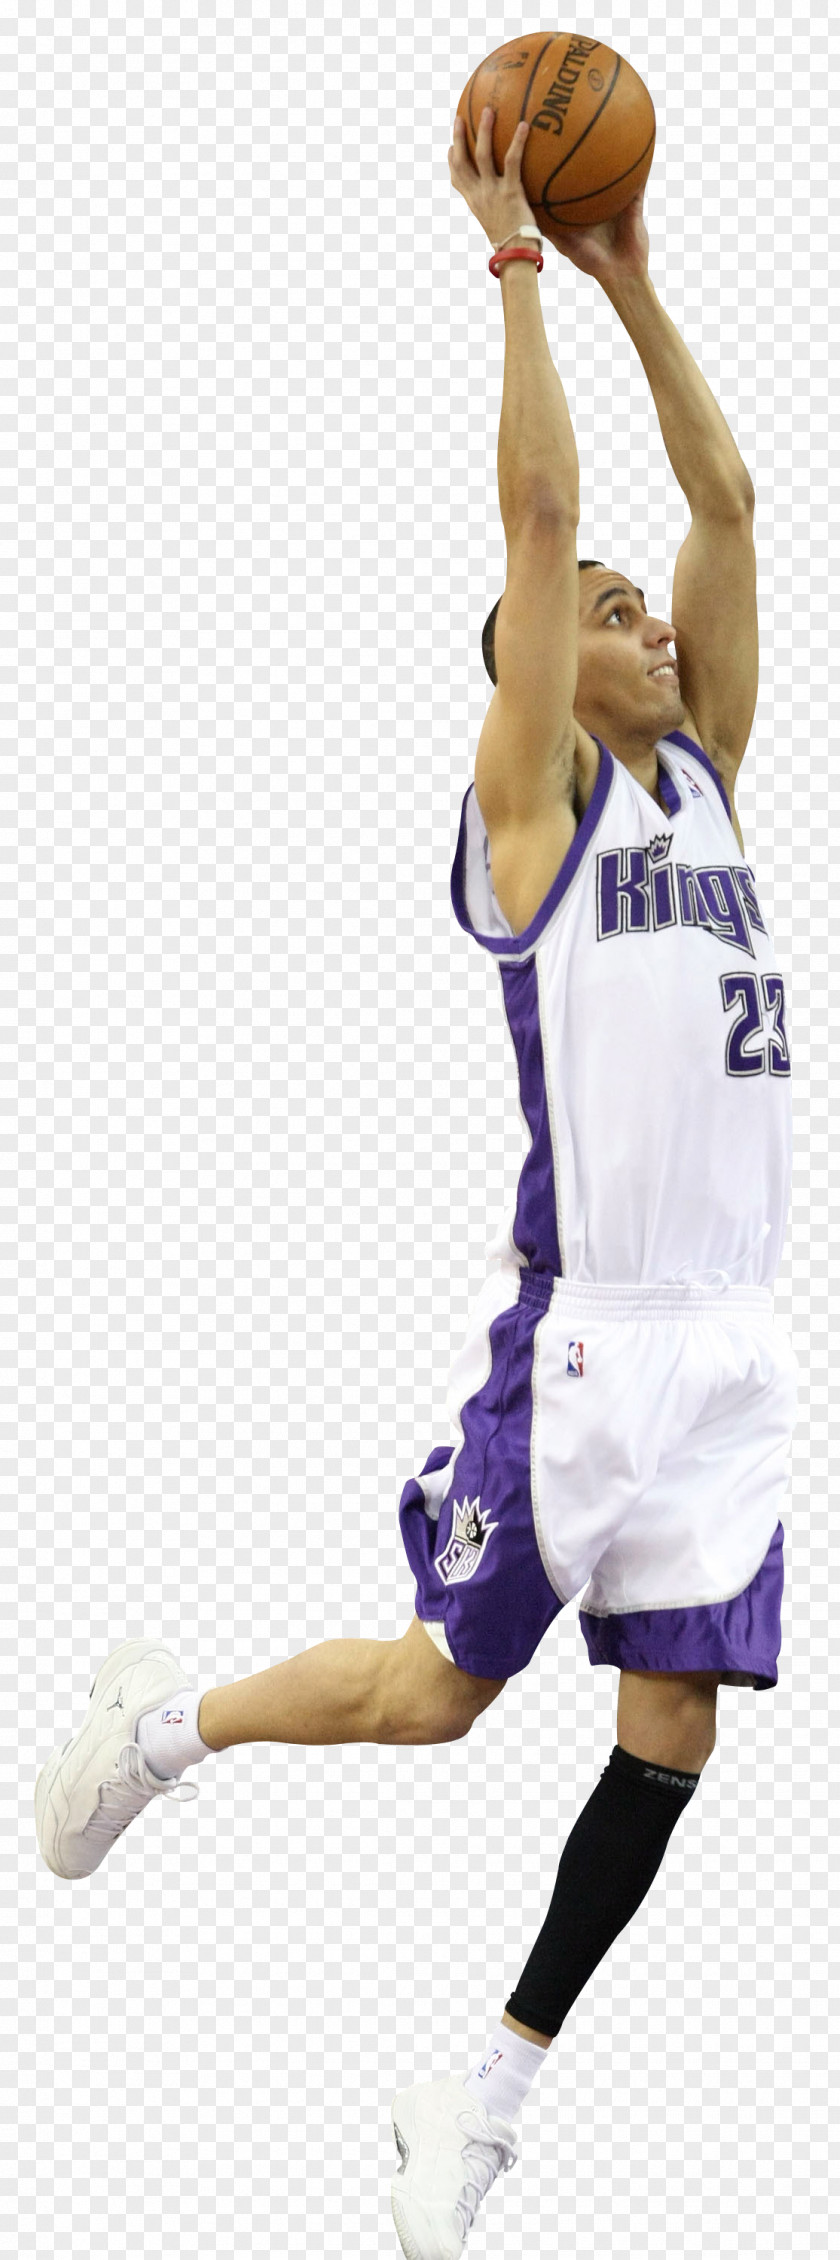 Basketball Player Sportswear Material Volleyball PNG